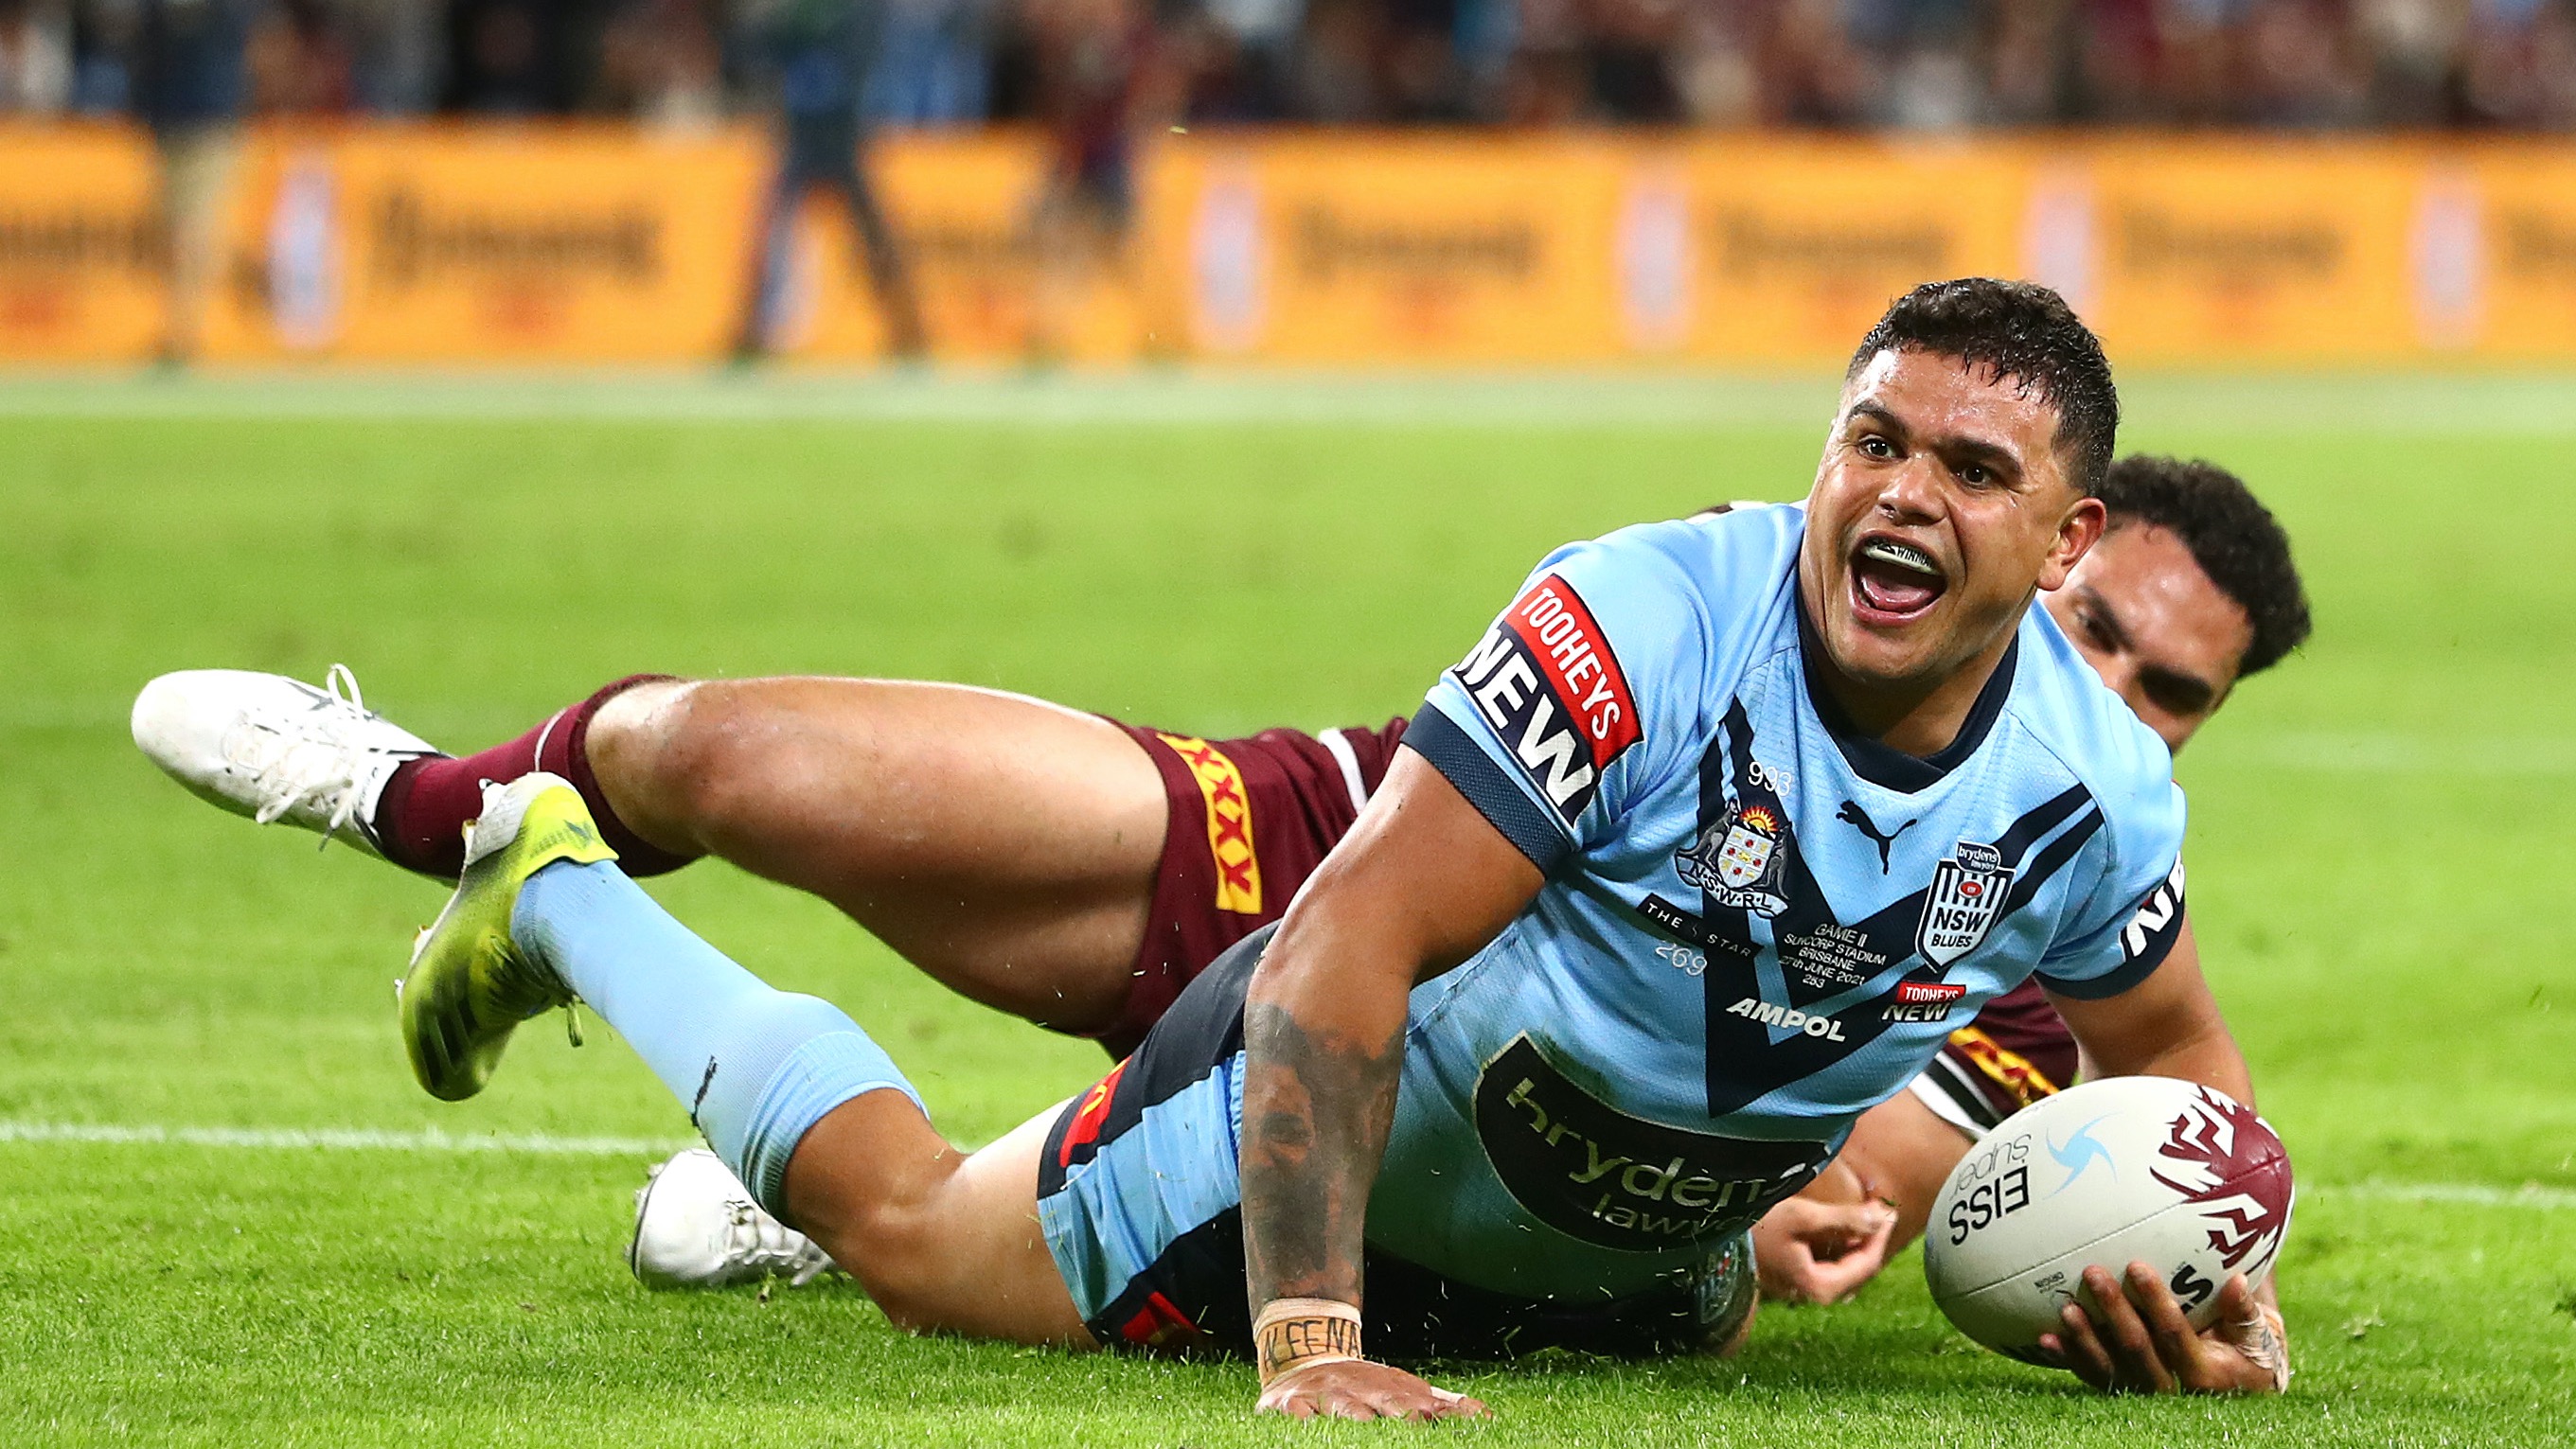 State of Origin 2021 Game 3 how to watch NSW vs Qld final from anywhere TechRadar